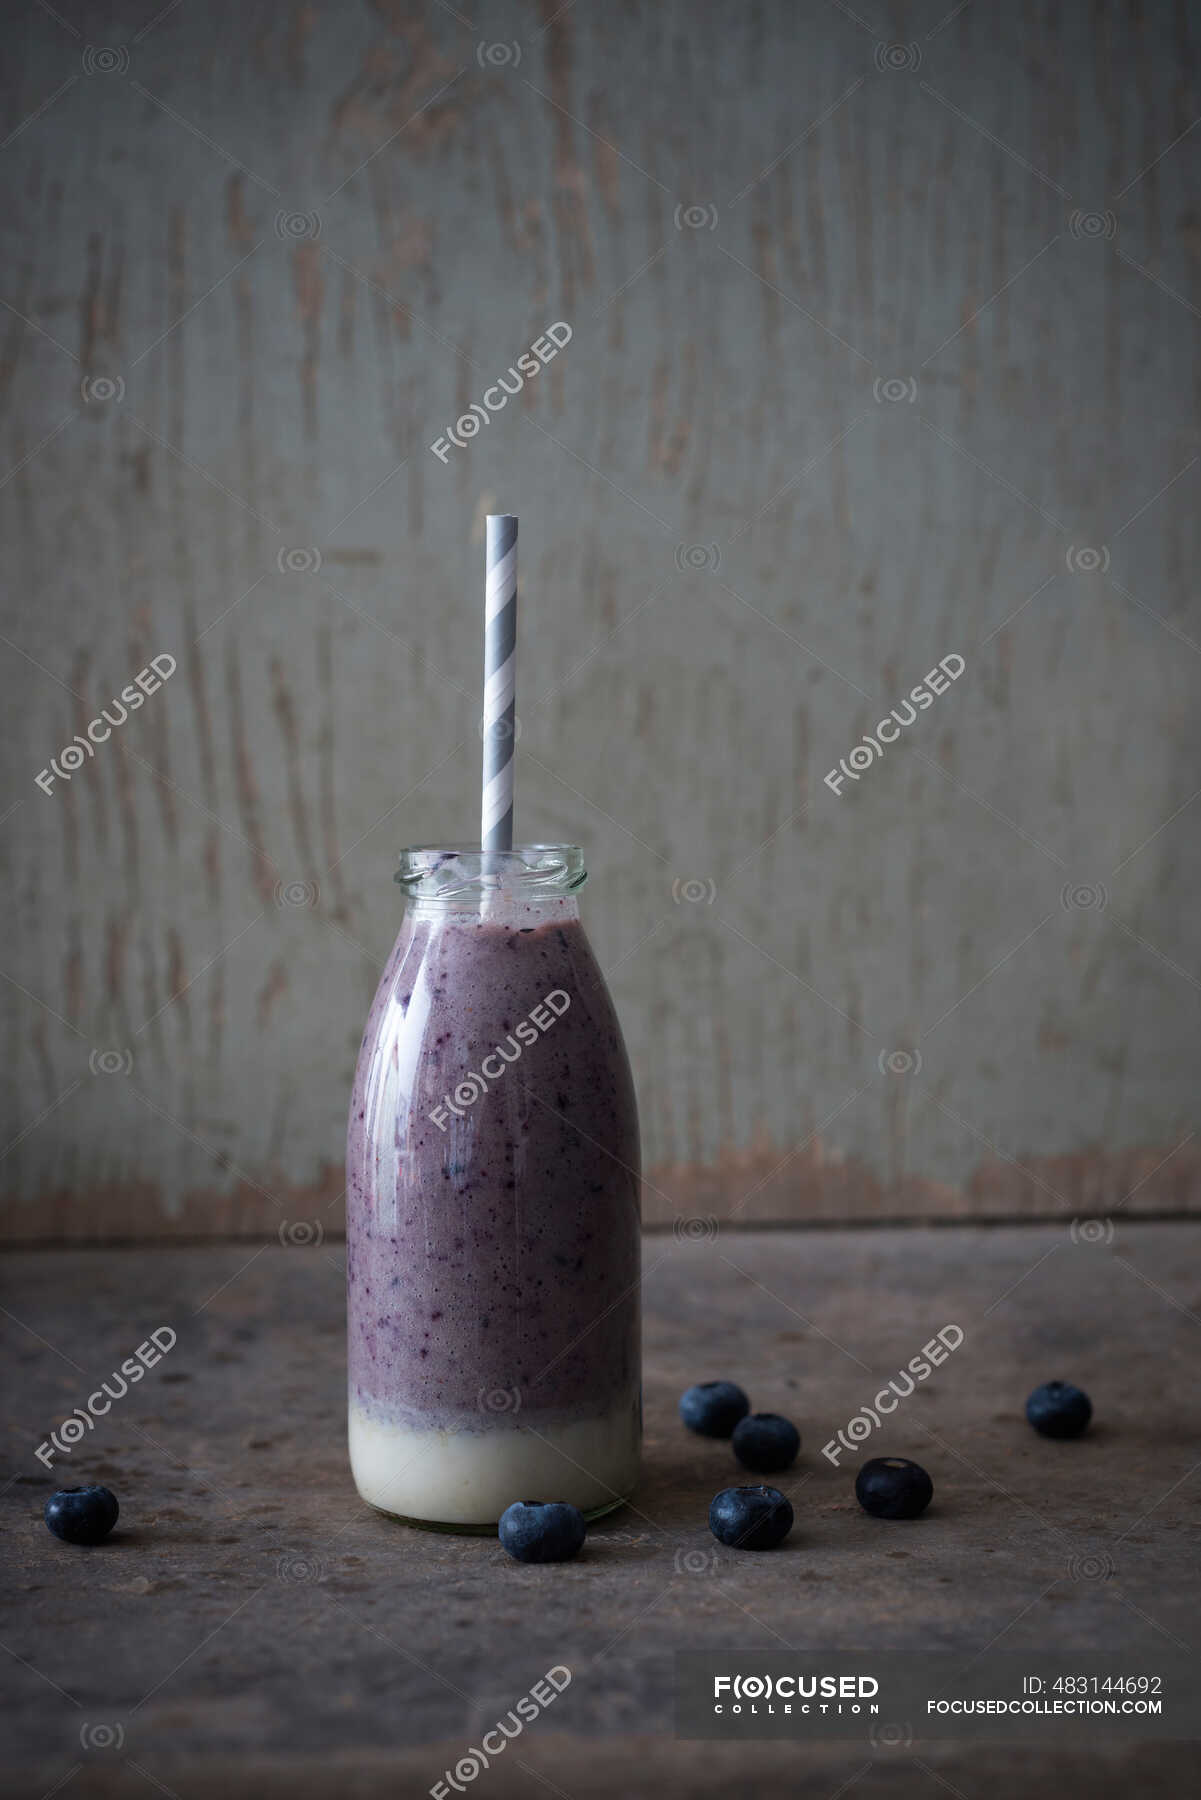 Vegan cashew nut and blueberry smoothie in a glass bottle — healthy food,  copy space - Stock Photo | #483144692